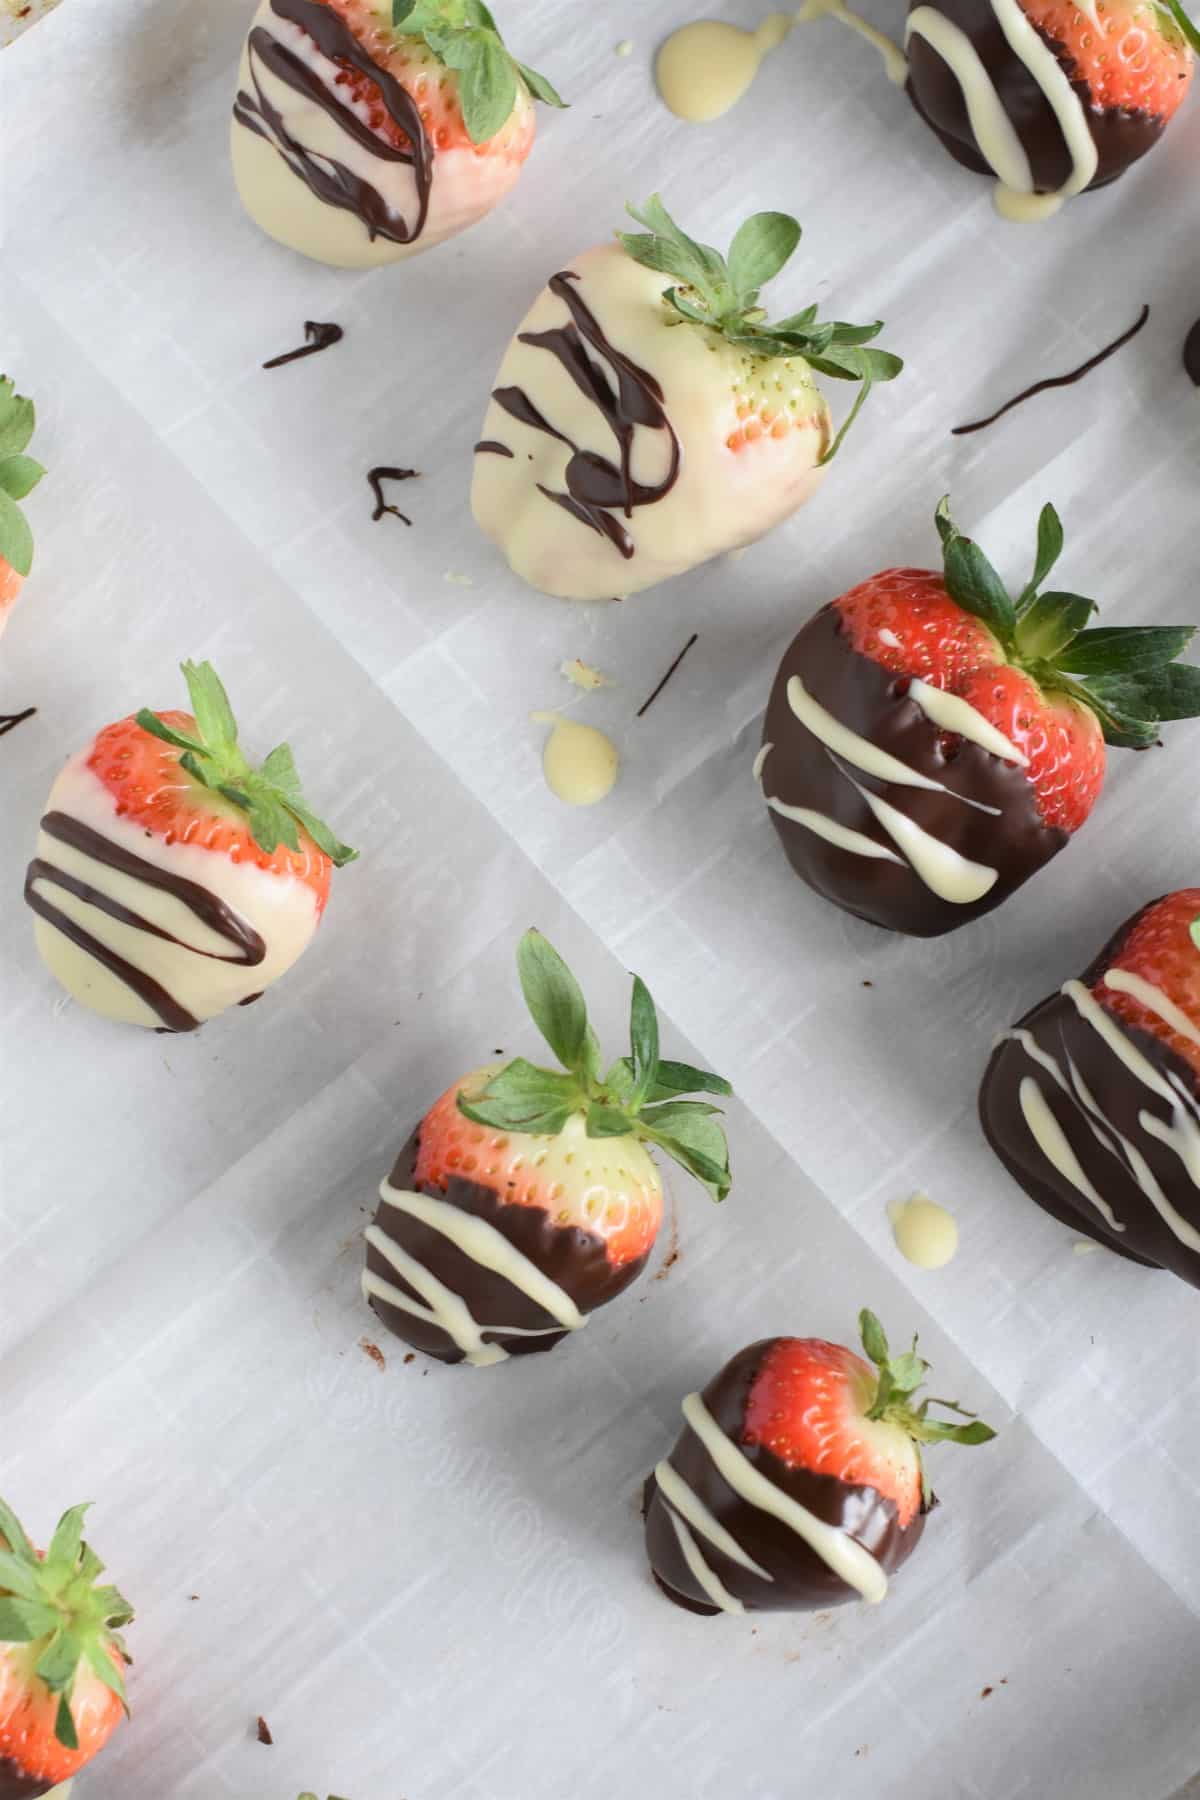 Dark and white chocolate dipped strawberries on parchment after setting in fridge